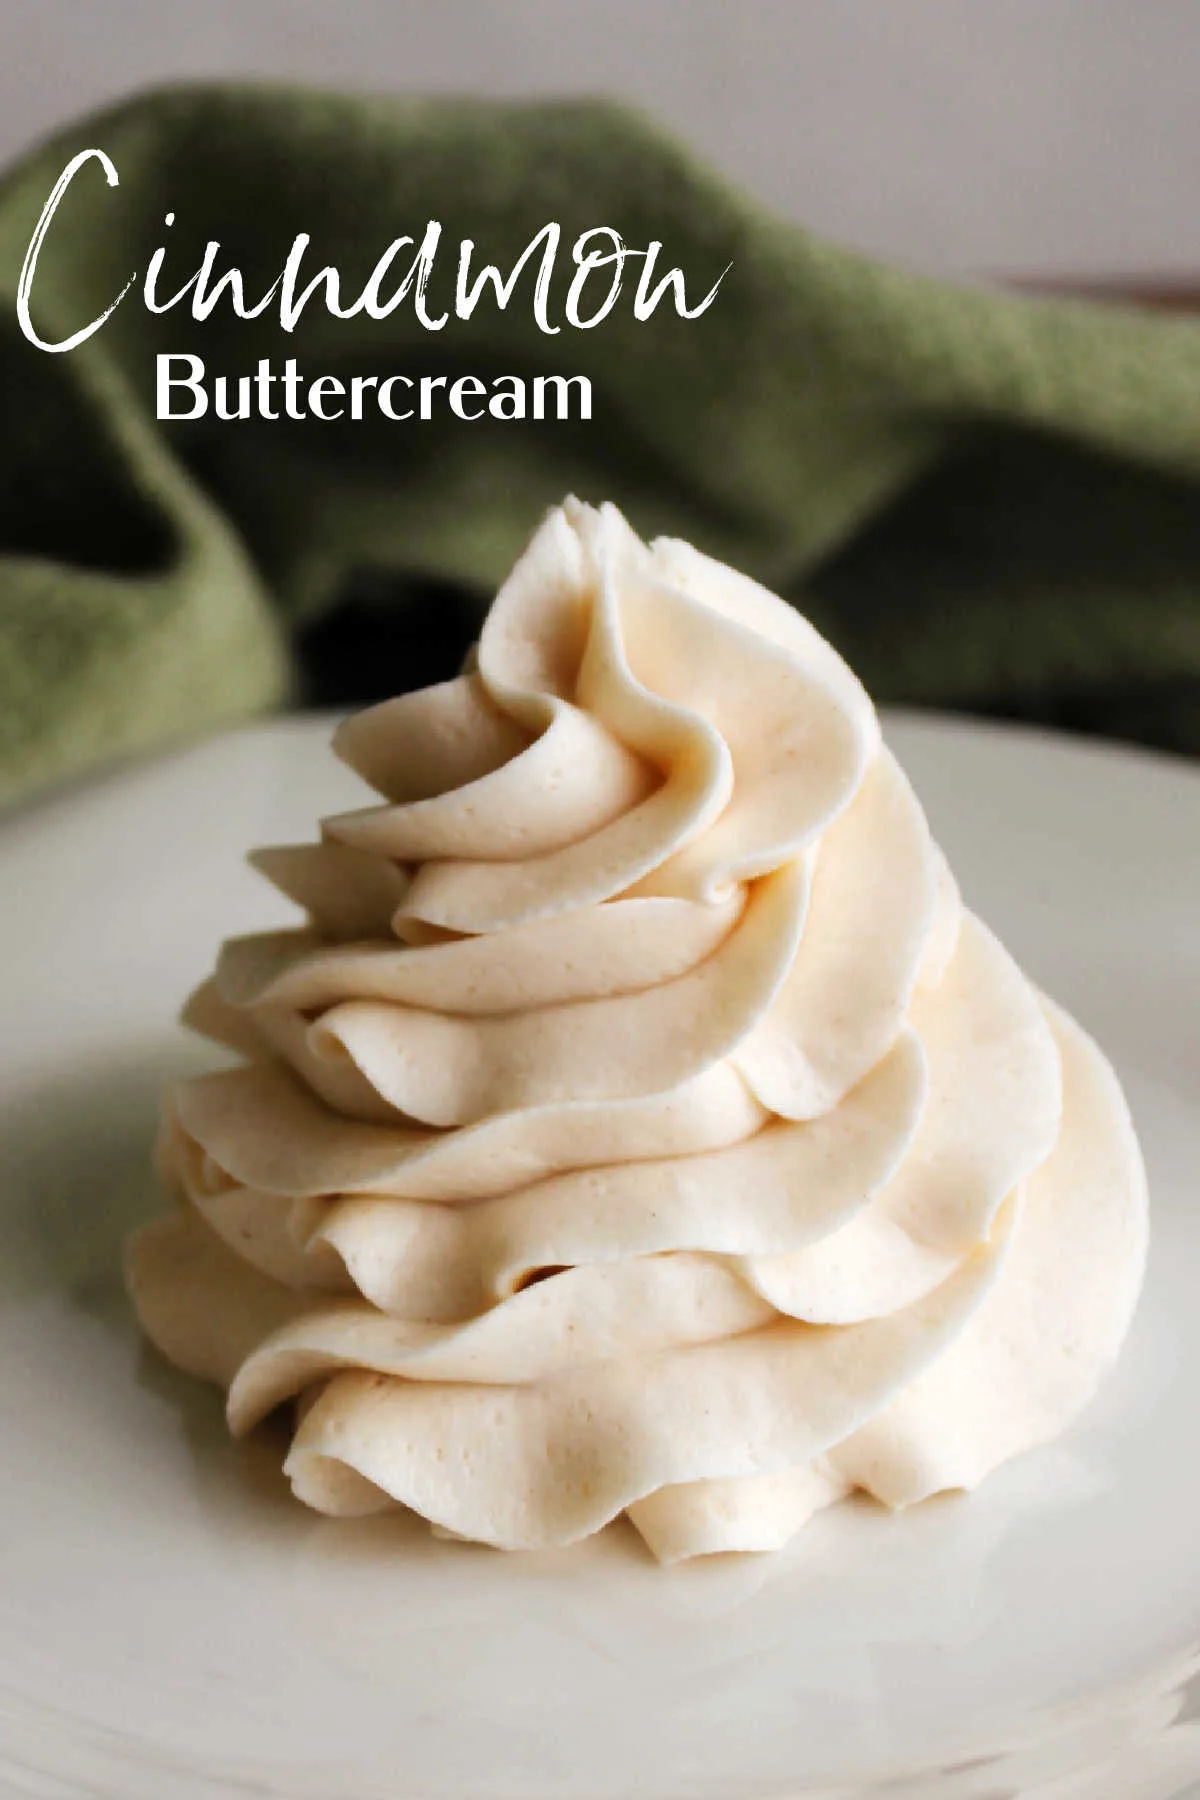 This frosting has the goodness of cinnamon and vanilla throughout. Cinnamon buttercream is perfect for apple, pumpkin, banana and spice cakes and cupcakes.